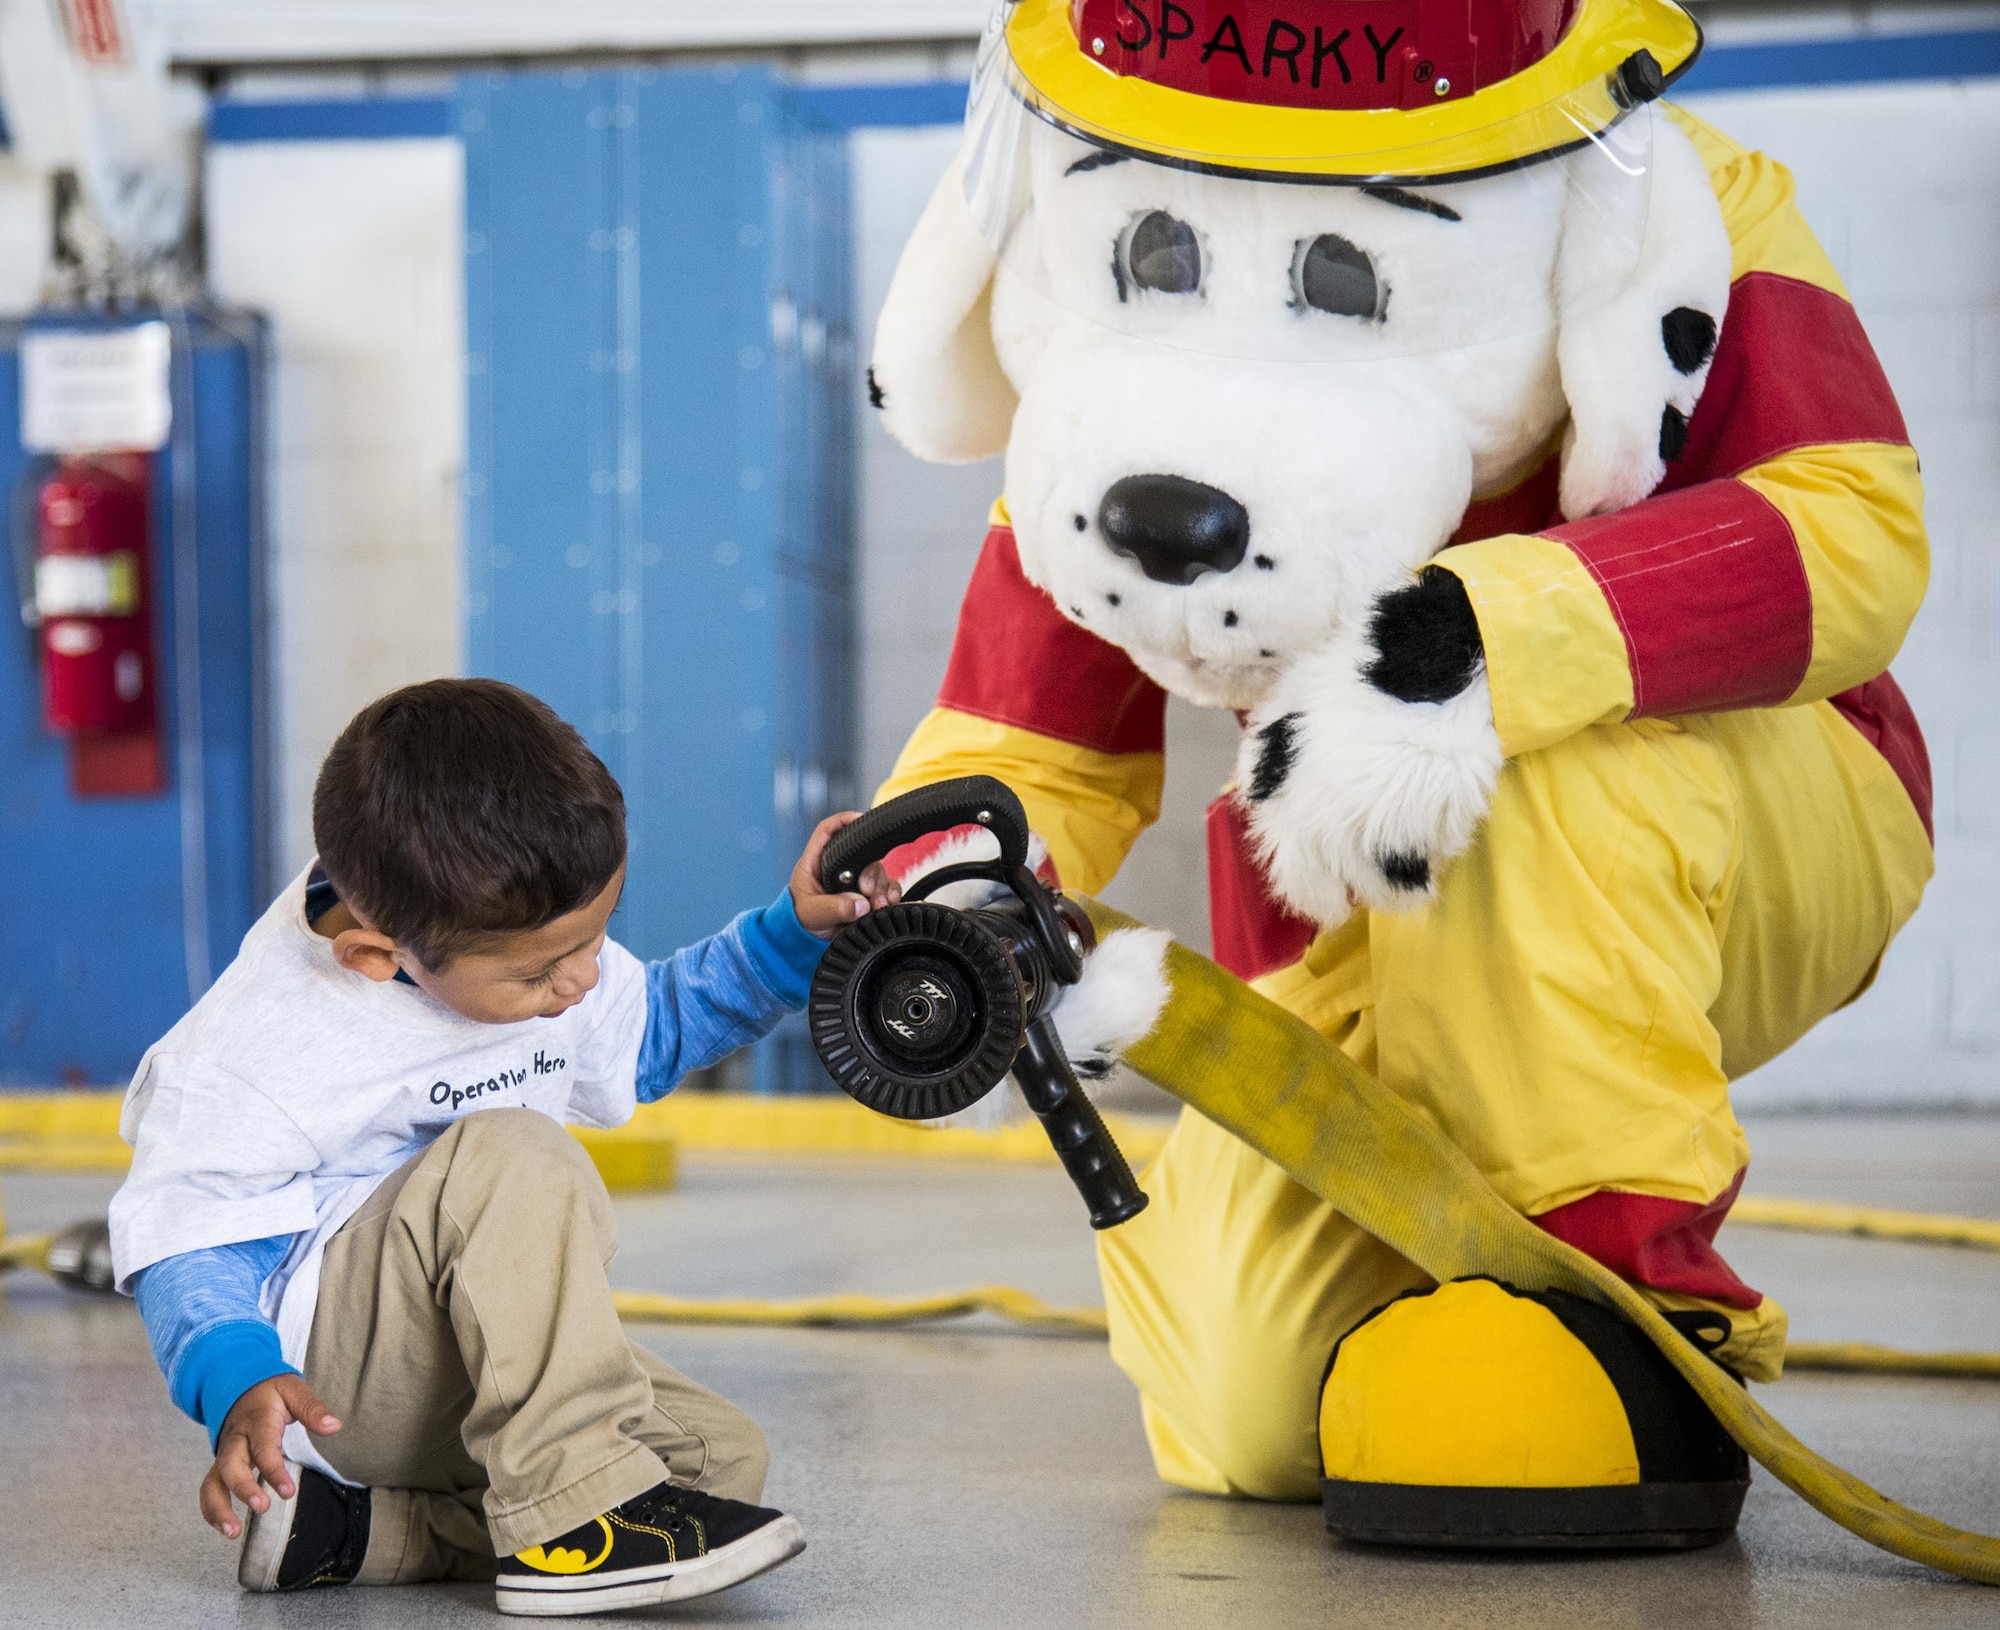 Sparky the Fire Dog explains how to use a fire hose to a new recruit during the Operation Hero event Oct. 22 at Eglin Air Force Base, Fla.  More than 100 kids participated in the mock deployment experience created to give military children a glimpse of what their loved ones go through when they leave home. The kids went through a deployment line to get their dog tags and “immunizations” before they were briefed by the commander and shipped off to a deployed location. There, they participated in various activities and demonstrations by local base agencies. (U.S. Air Force photo/Samuel King Jr.)